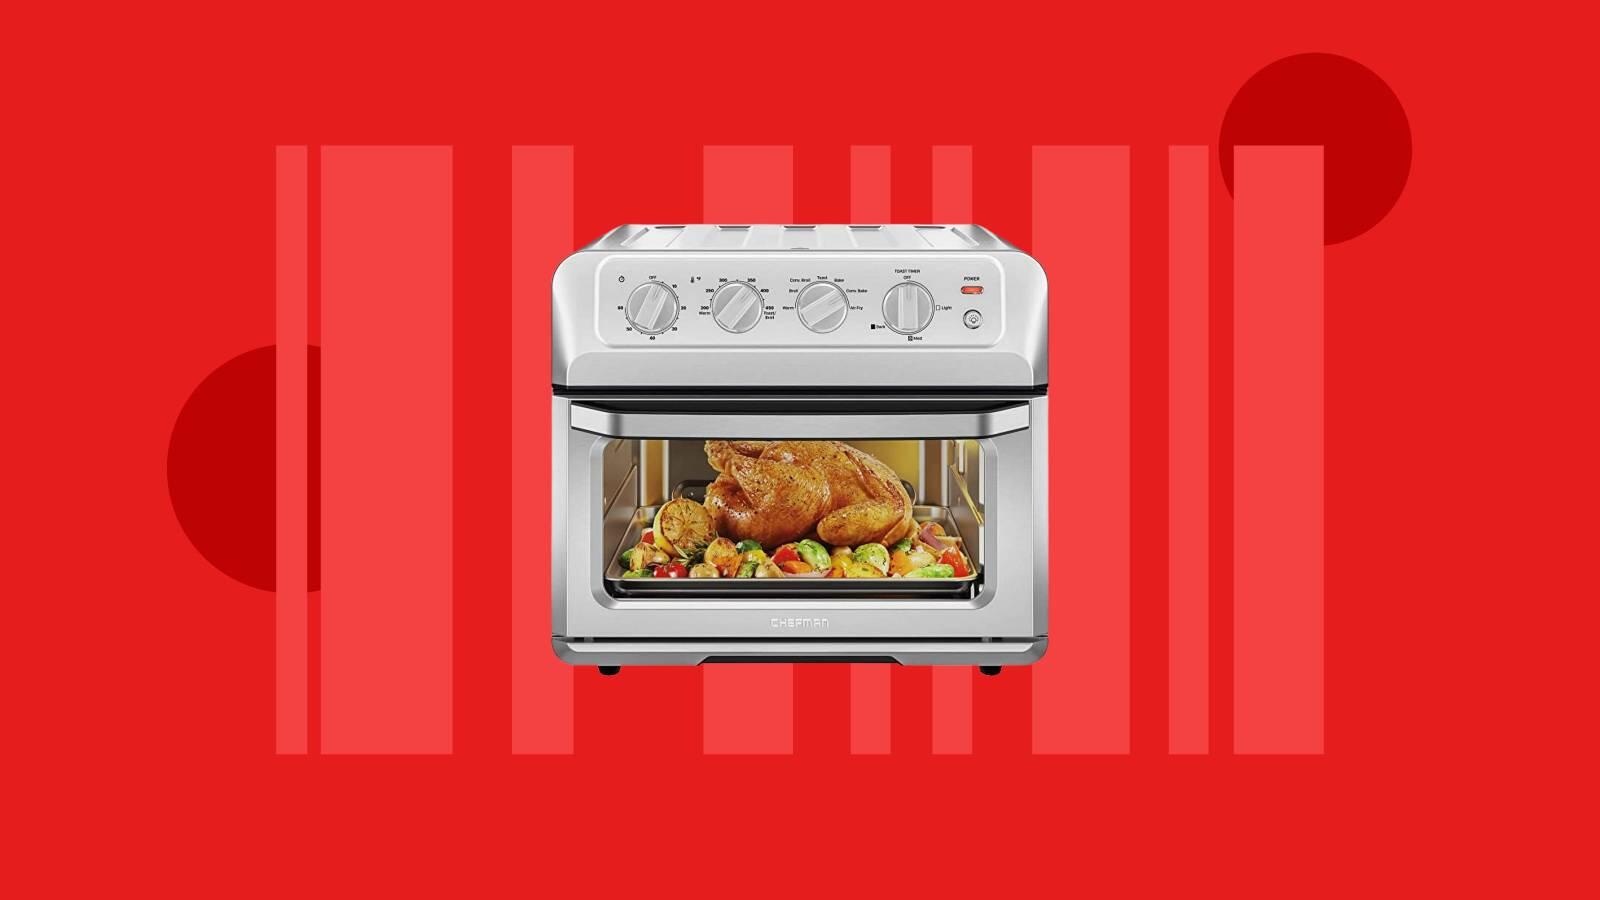 https://www.cnet.com/a/img/hub/2023/11/15/894380ab-bc71-4d34-a440-4466a2e776fe/ninja-foodi-digital-air-fry-oven-with-convection.jpg